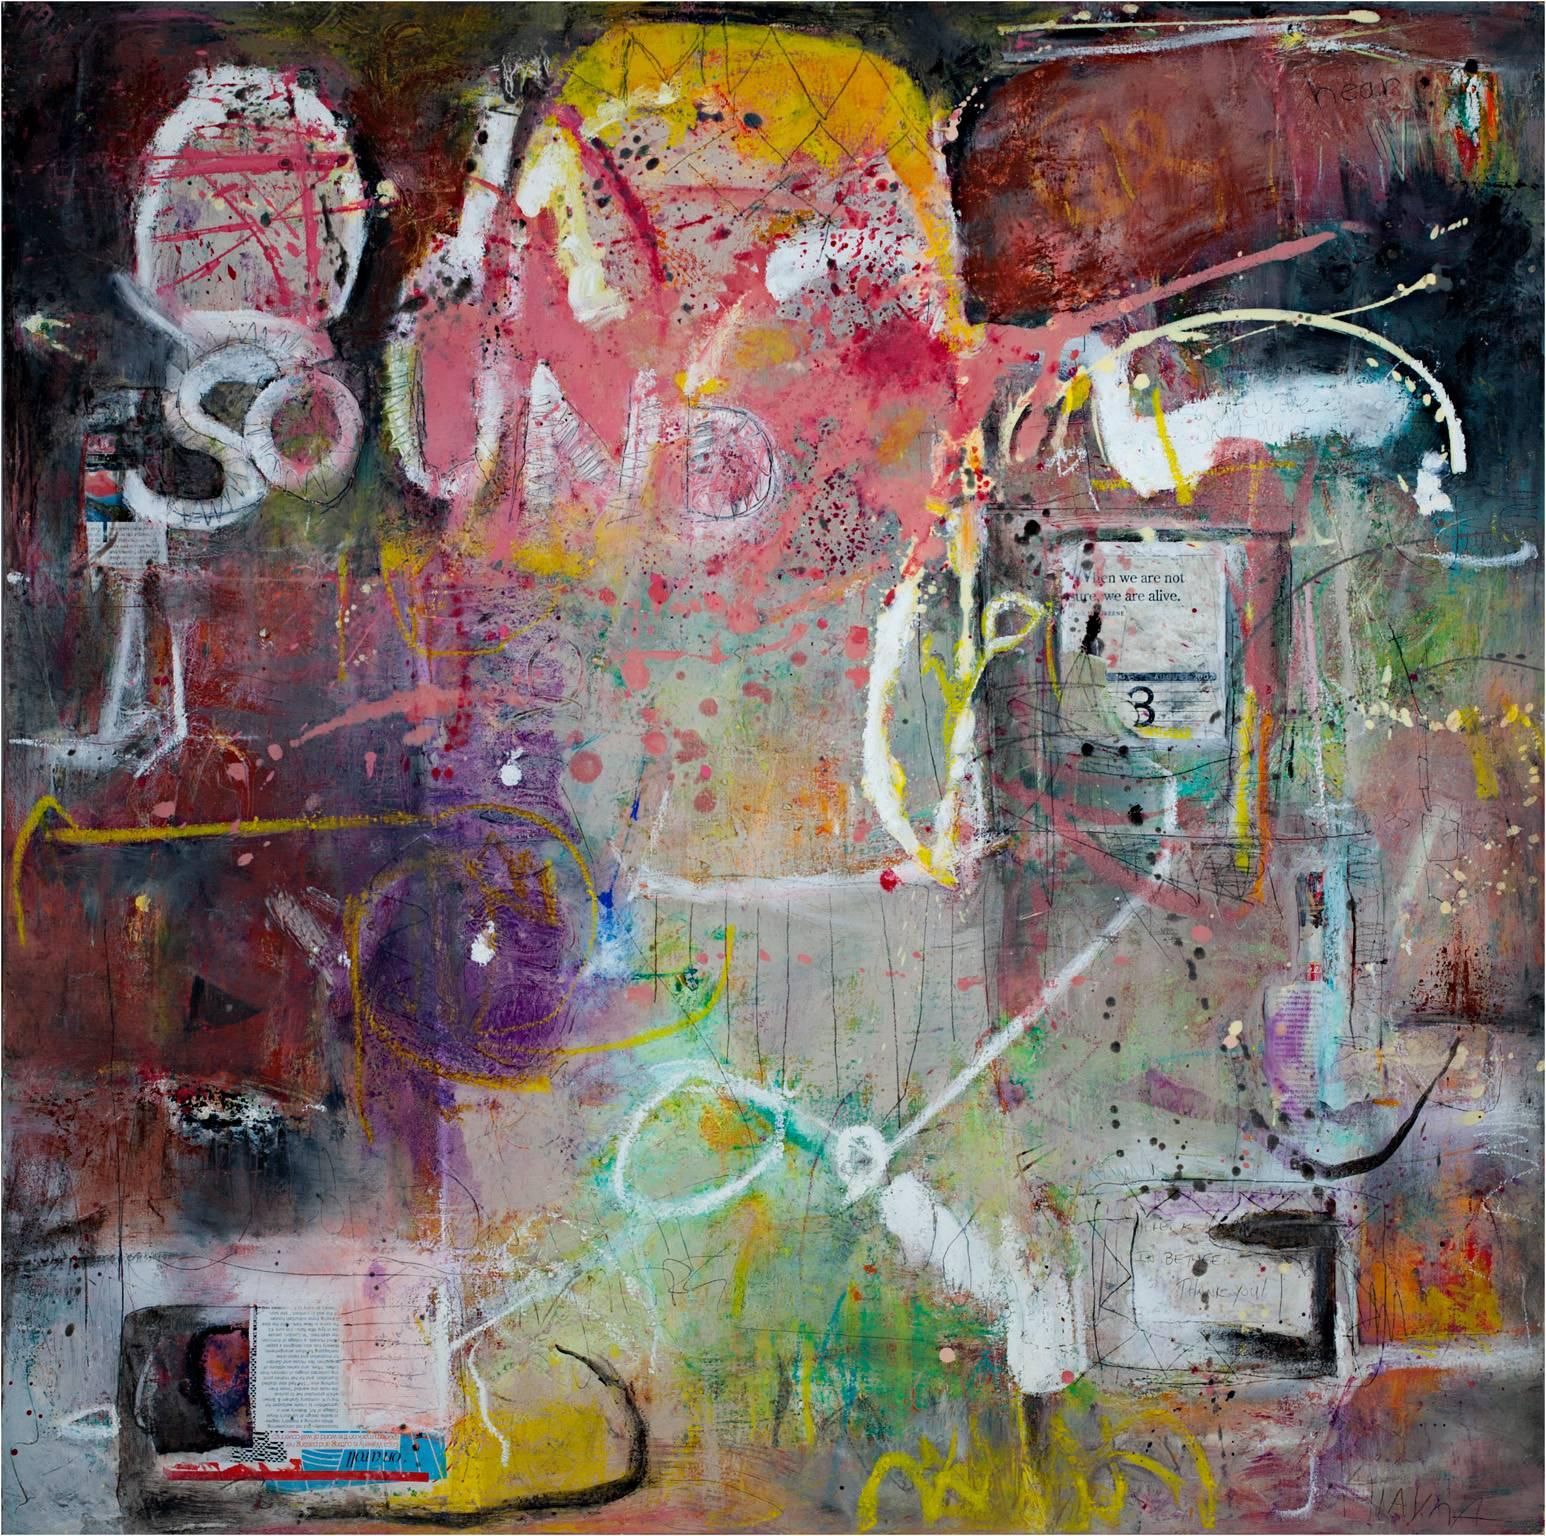 Alayna Rose Abstract Painting - "Sound" Mixed Media abstract signed dada text grunge graffiti expressionist bold